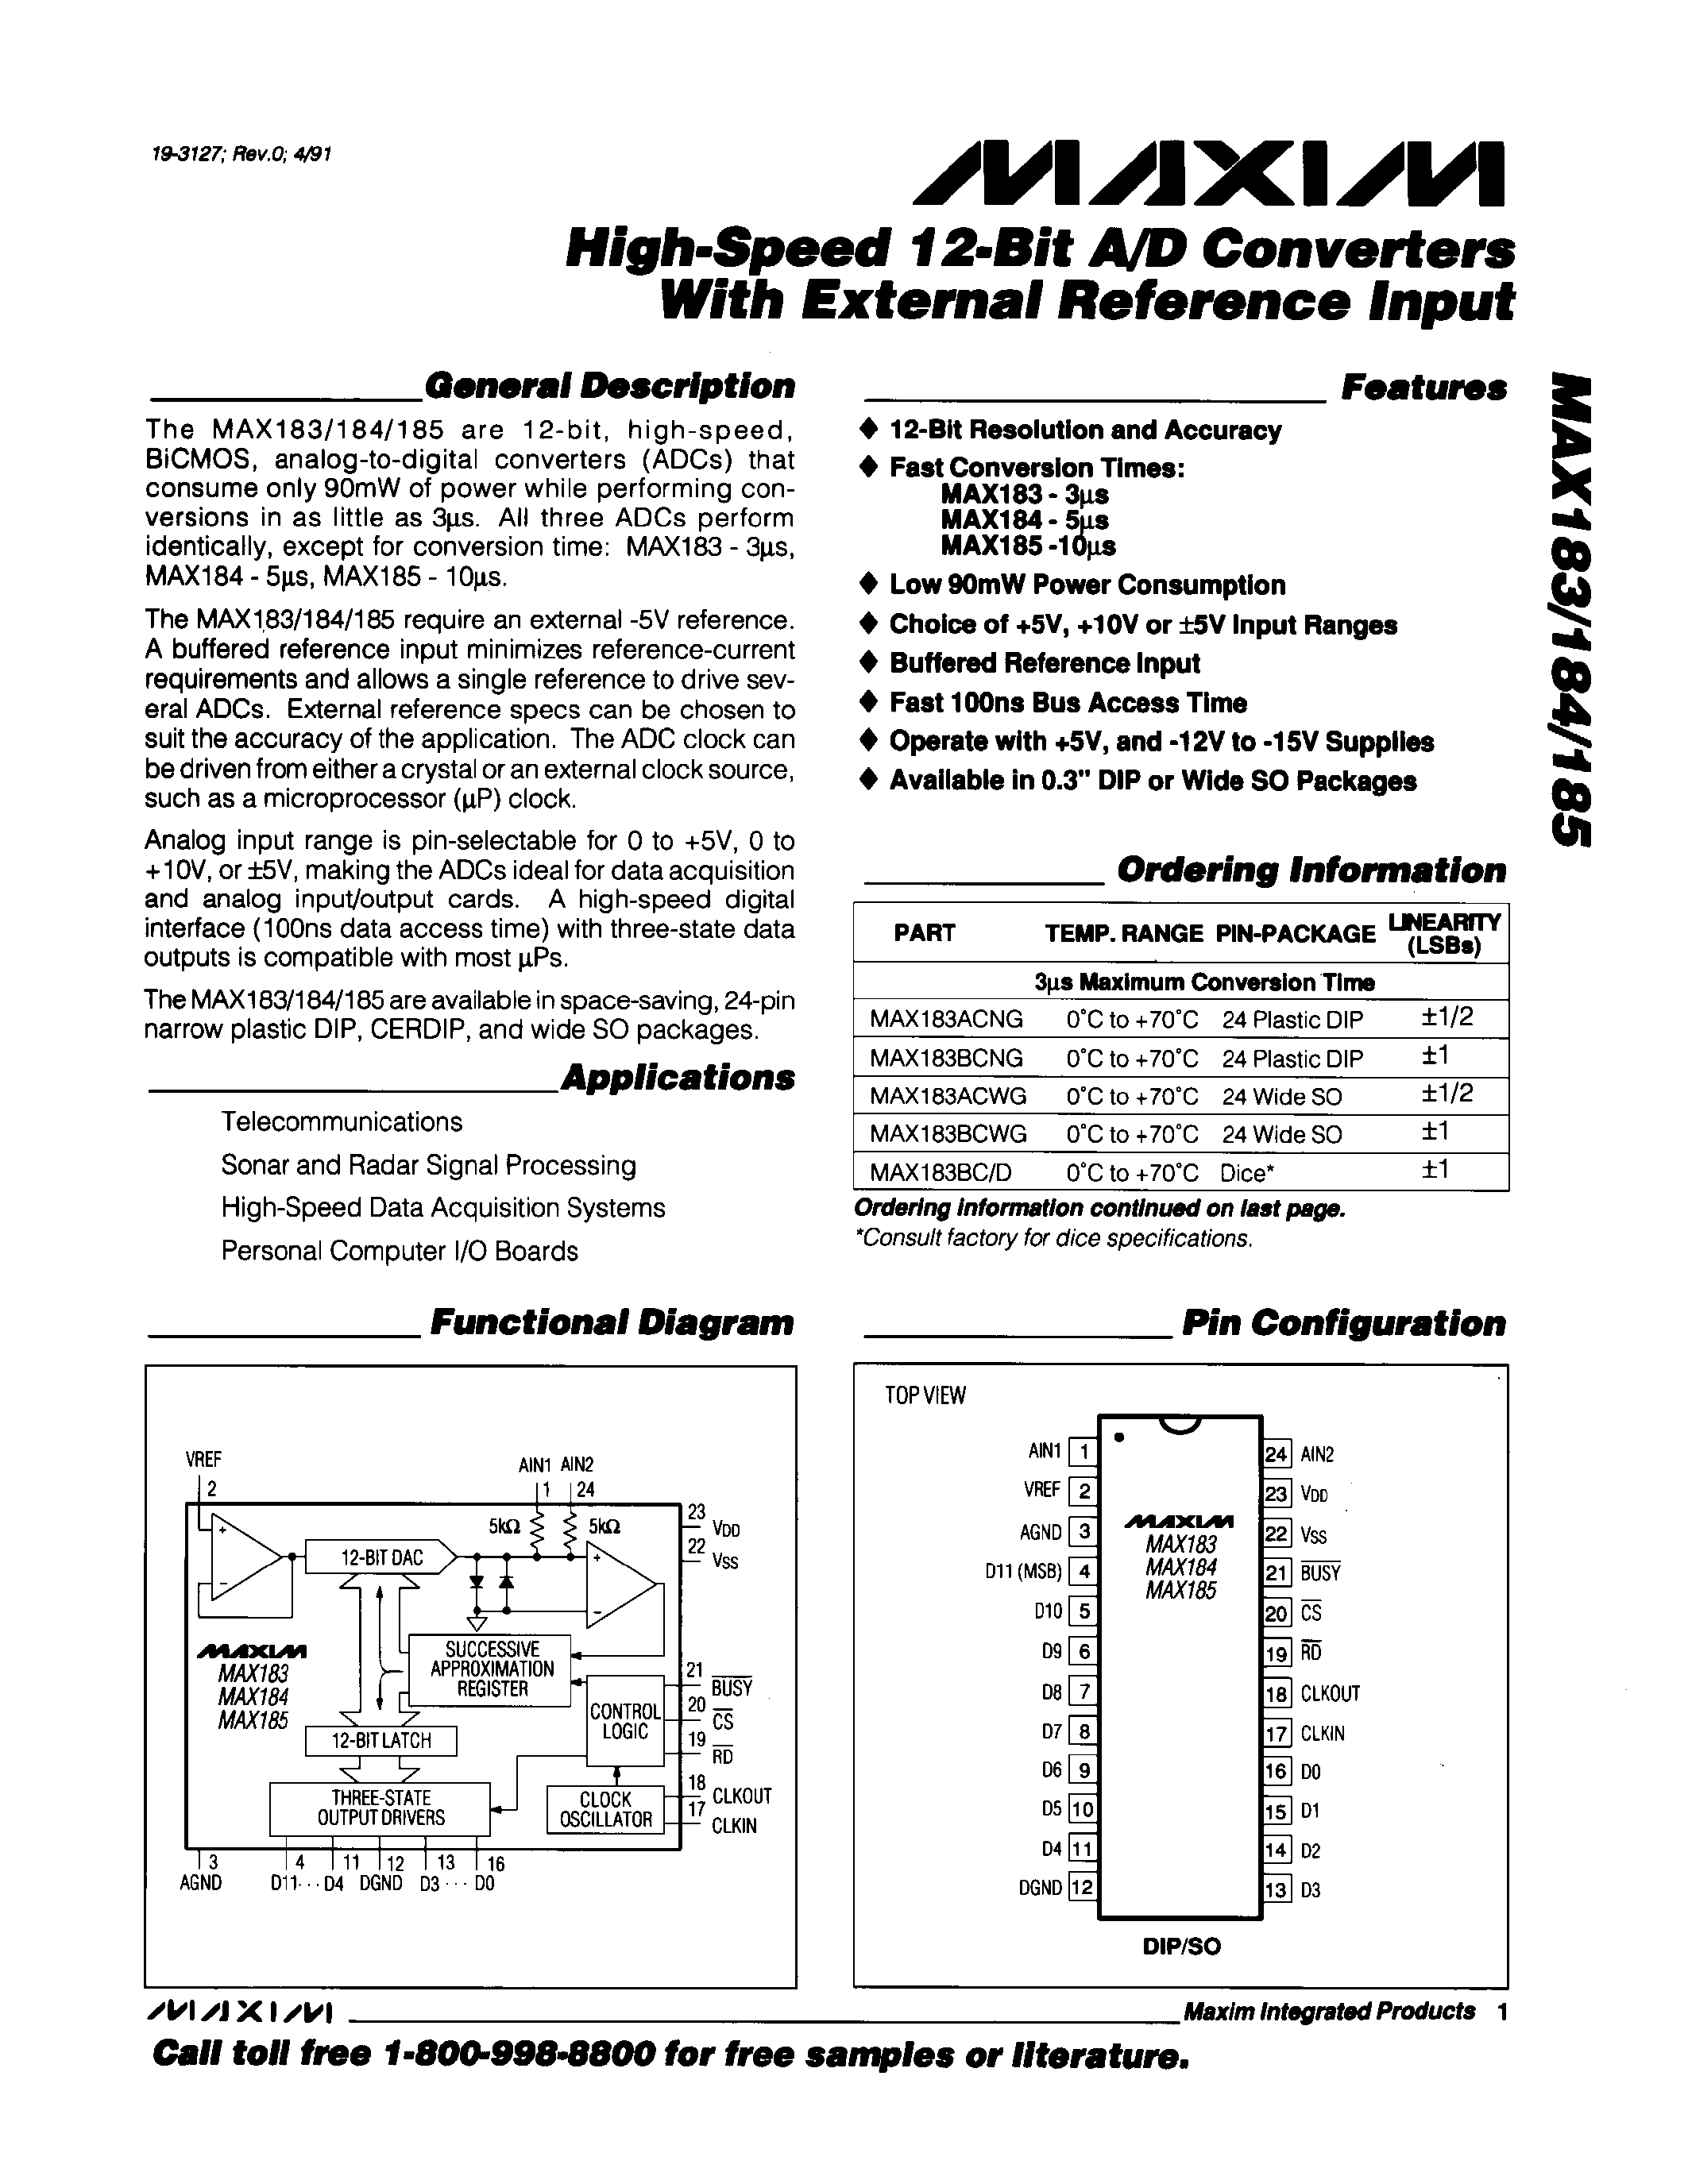 Datasheet MAX185BC/D - High-Speed 12-Bit A/D Converters With External Refernce input page 1